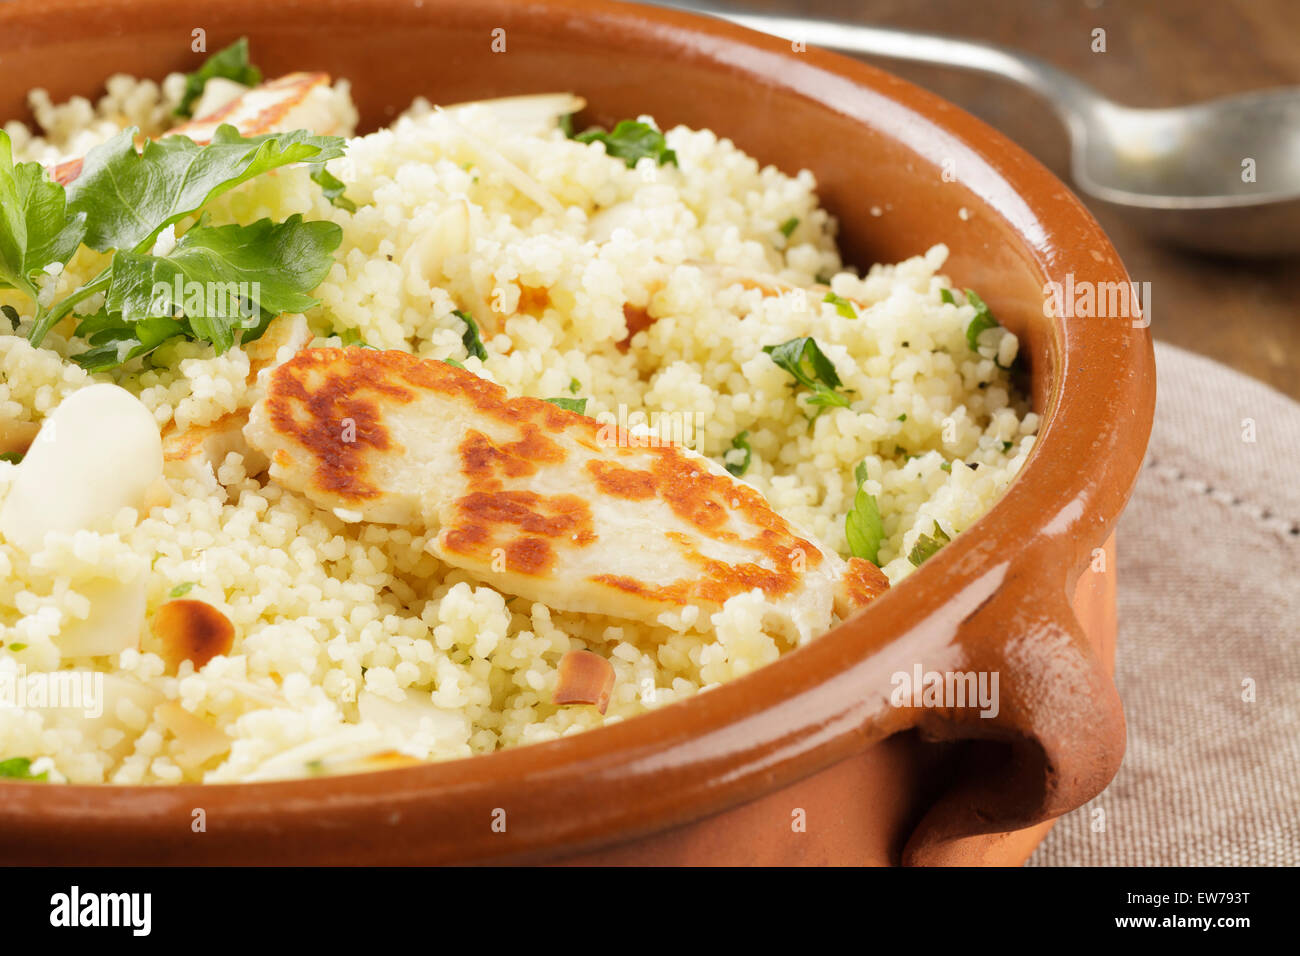 Lemon and parsley couscous with almonds and halloumi Stock Photo